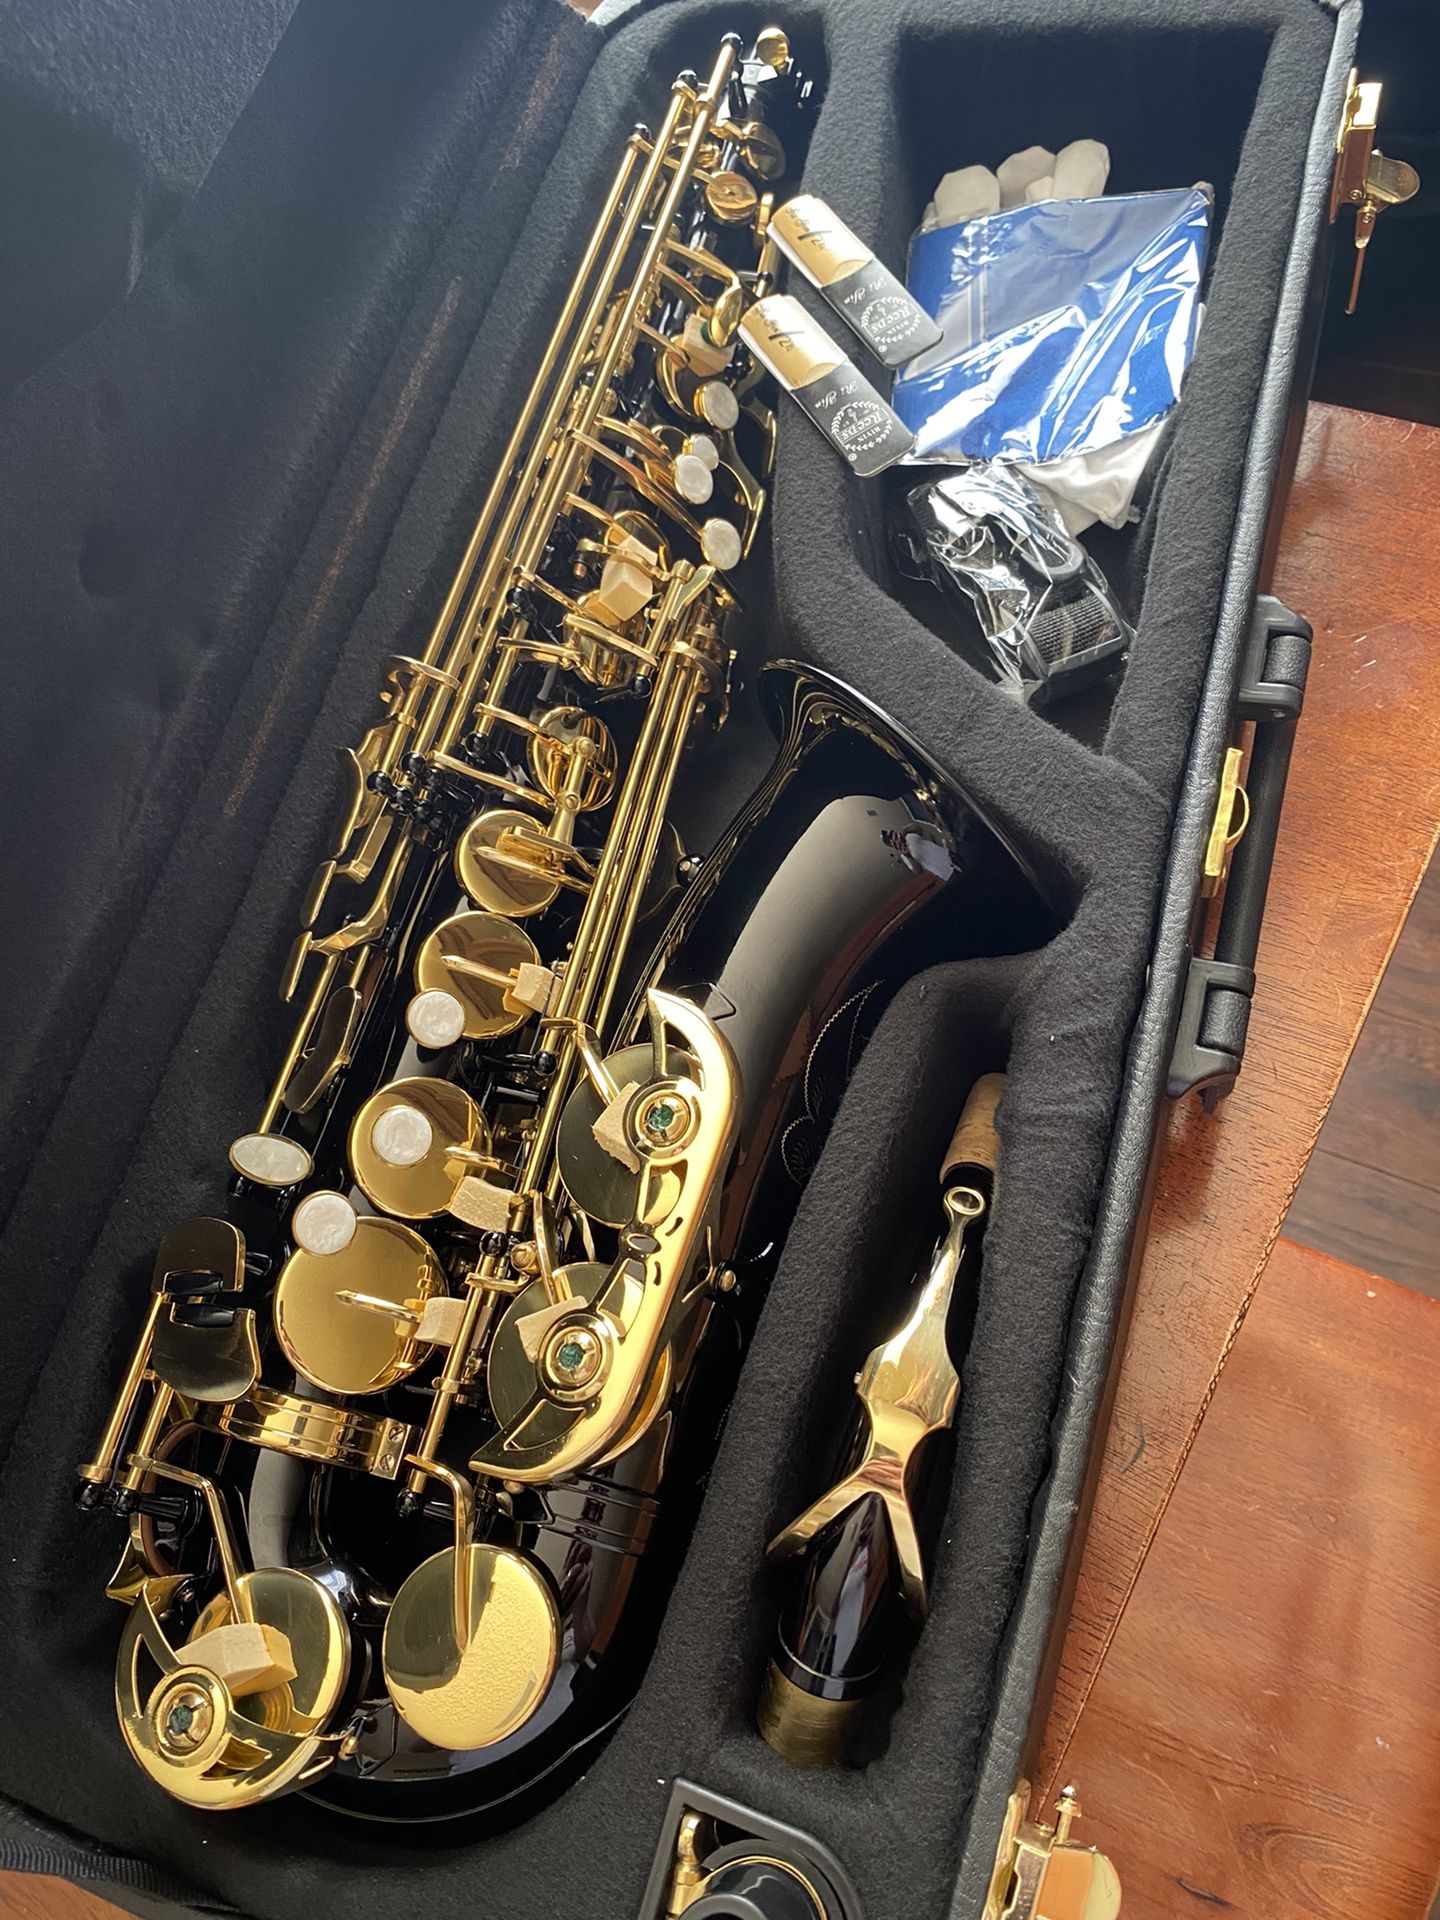 Beautiful Black Alto Saxophone with New Set of Reeds Excellent Condition $350 Firm